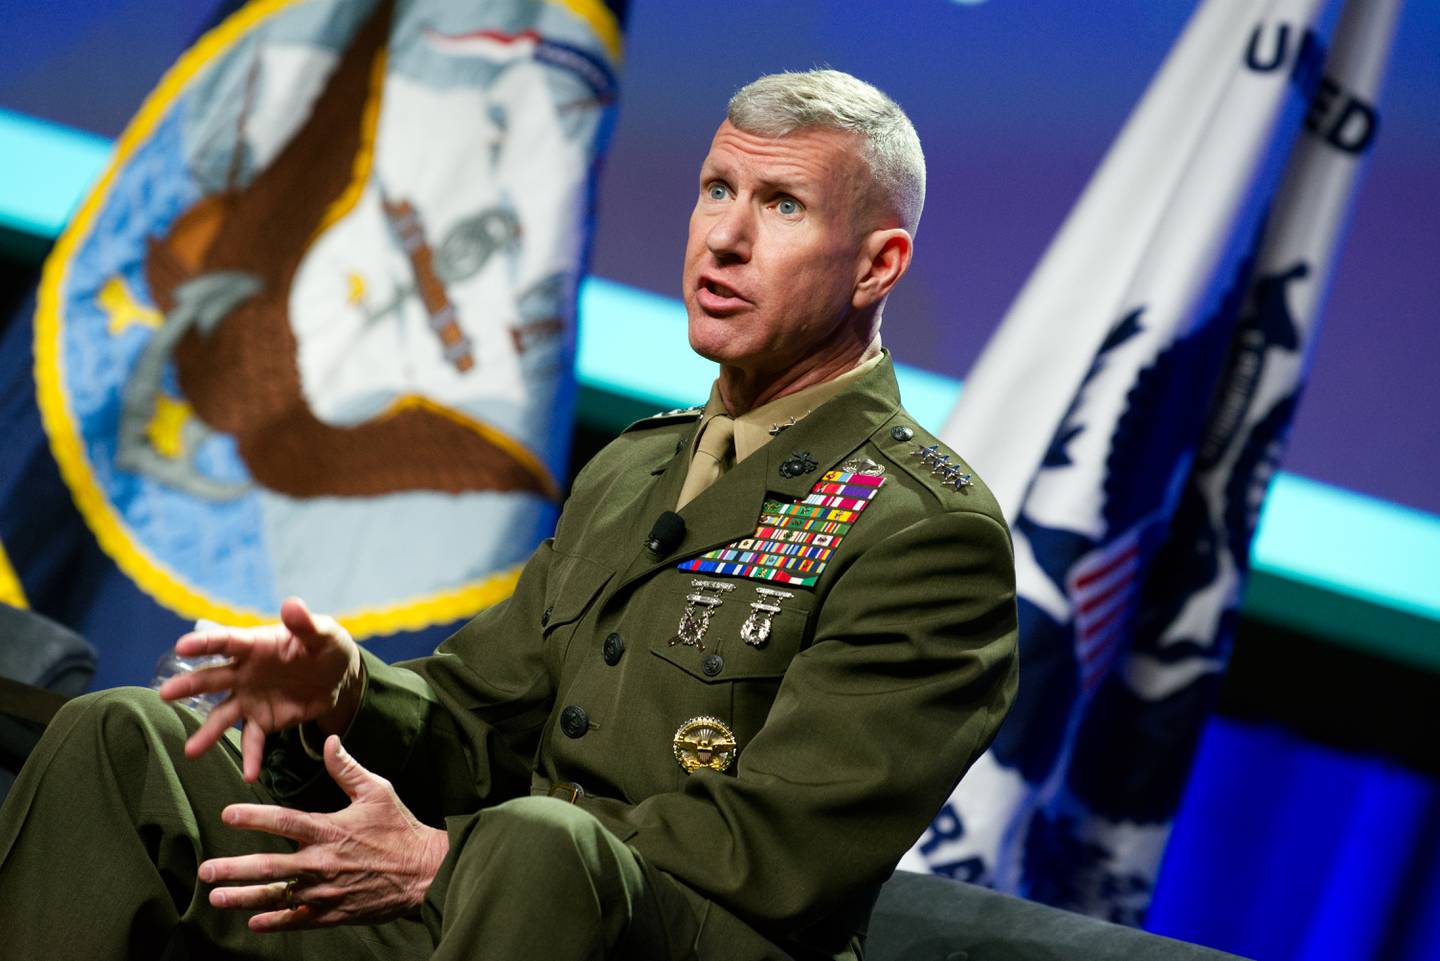 Assistant Commandant Of The Marine Corps Gen. Eric Smith gestures as he speaks onstage at the Sea-Air-Space conference in National Harbor, Maryland, on April 4, 2023.